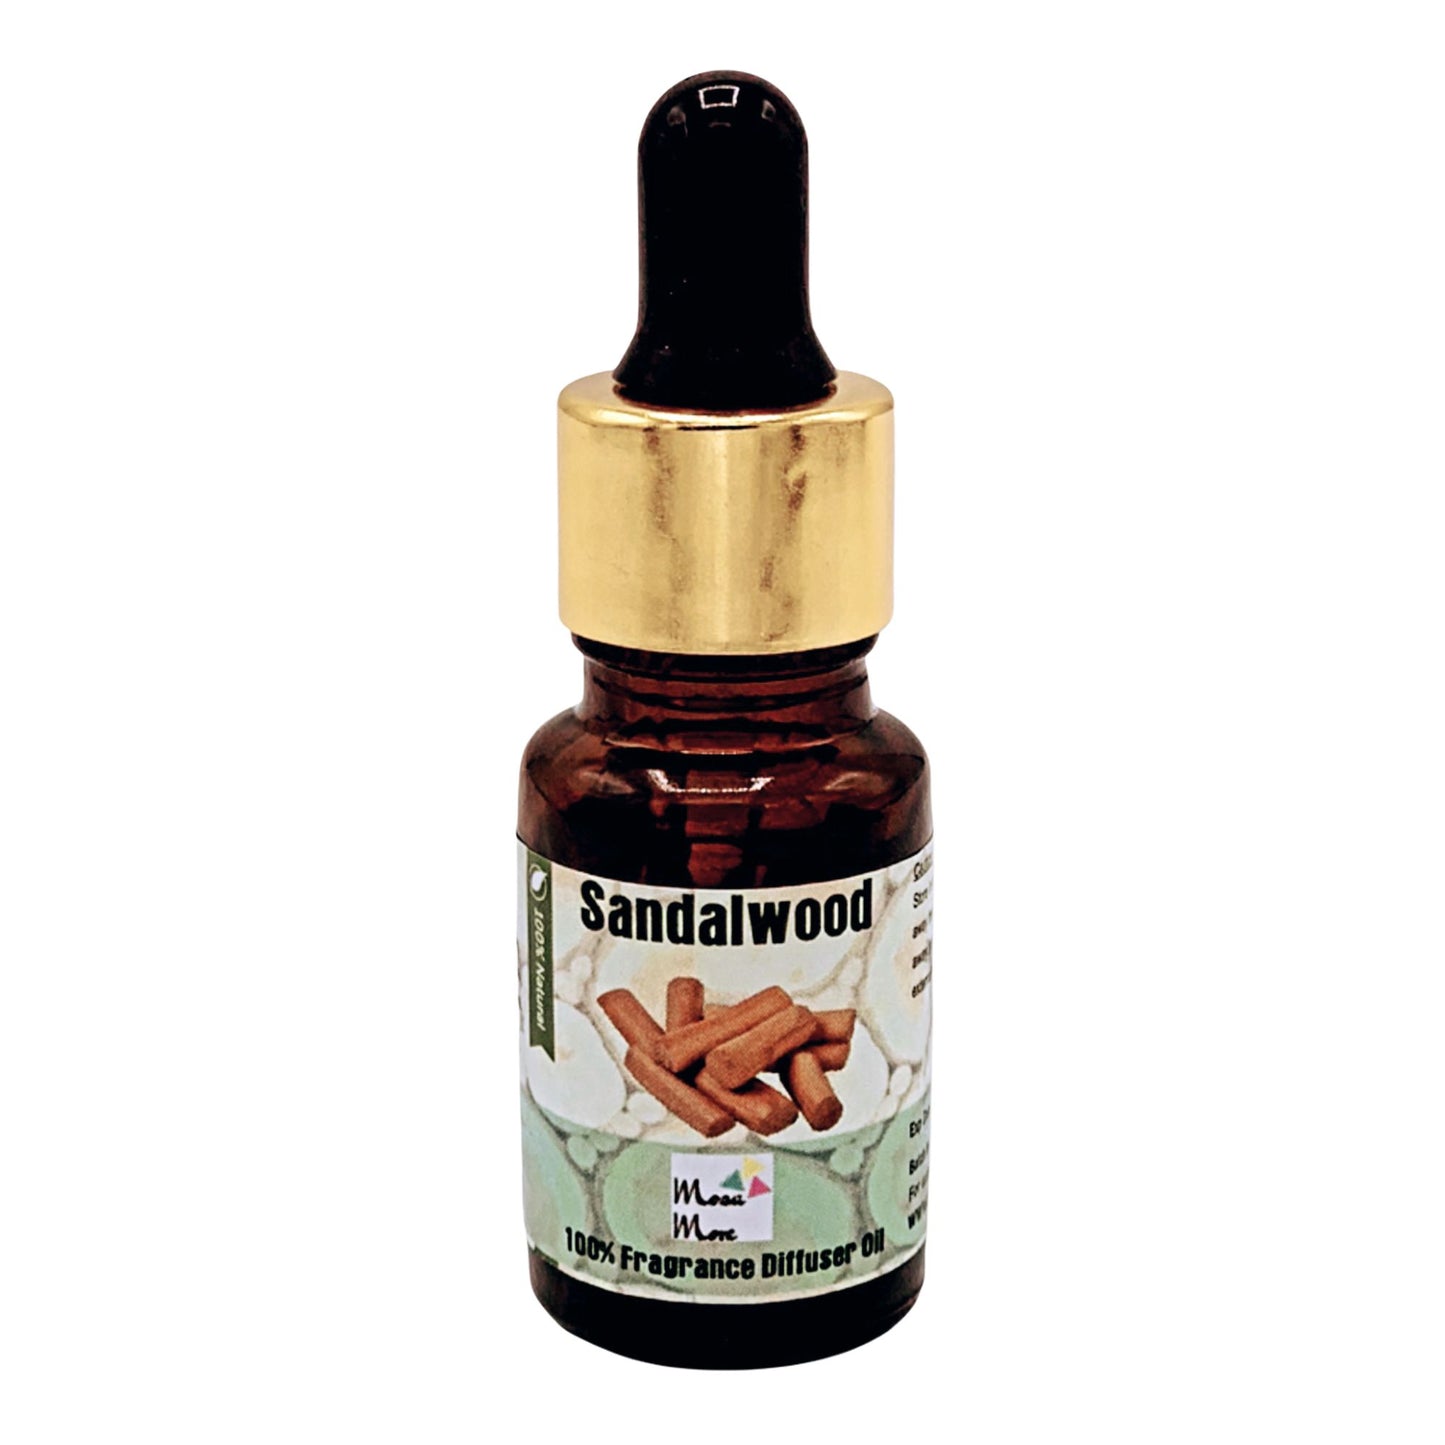 Mosa More Sandalwood Fine Fragrance Oil Aromatherapy for Diffuser, Massage, Libido arousal, Inhibition reduction 10ml